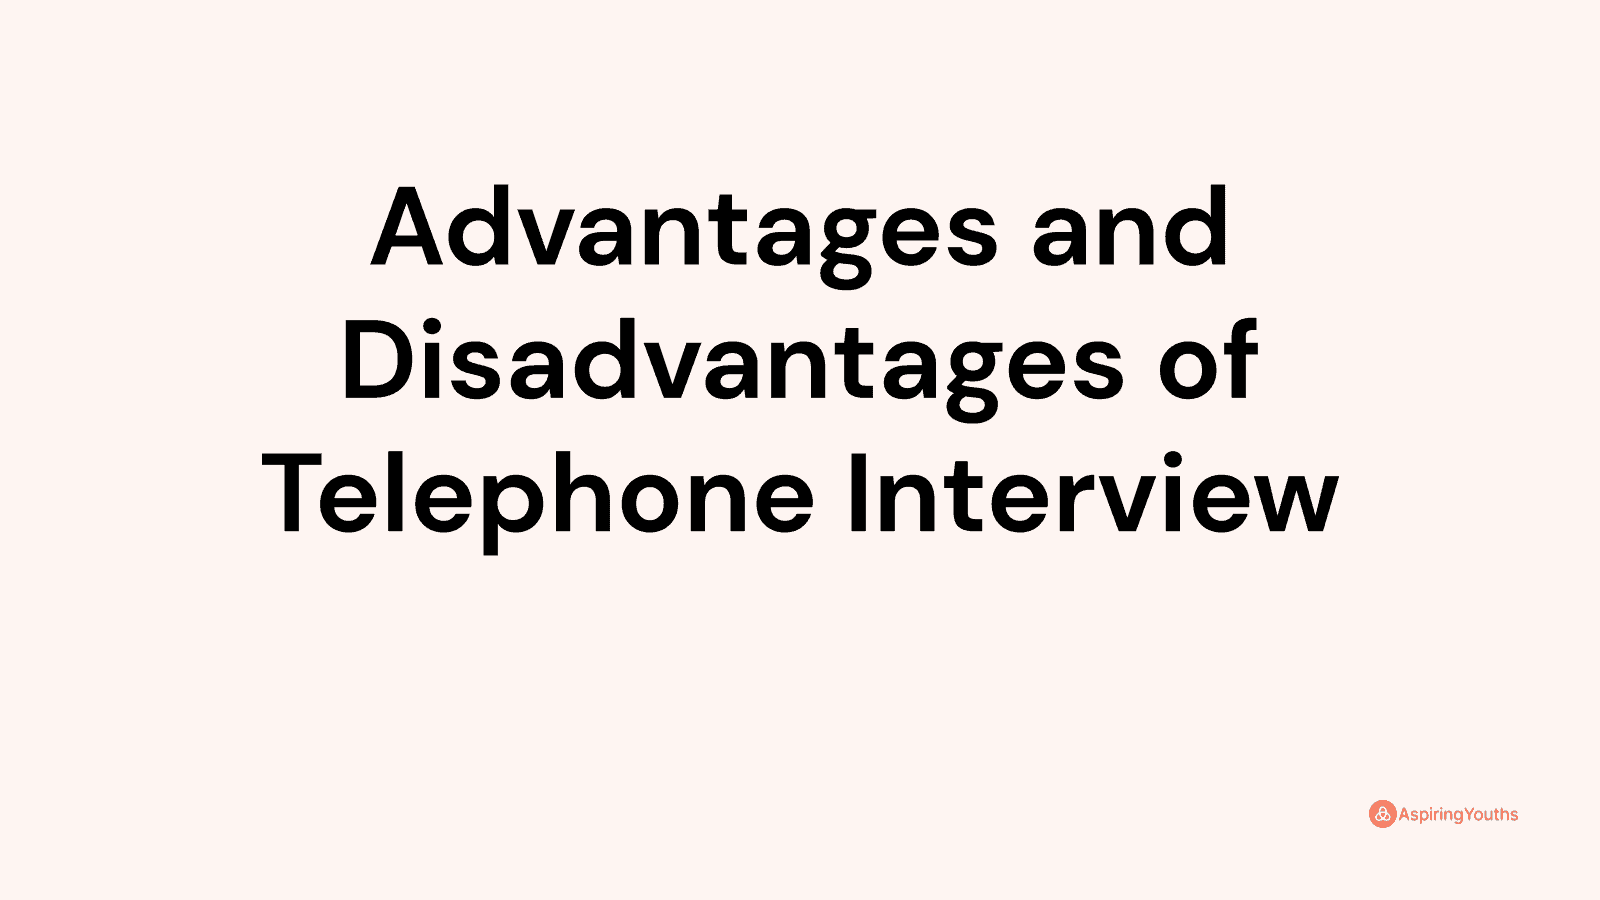 Advantages and disadvantages of Telephone Interview